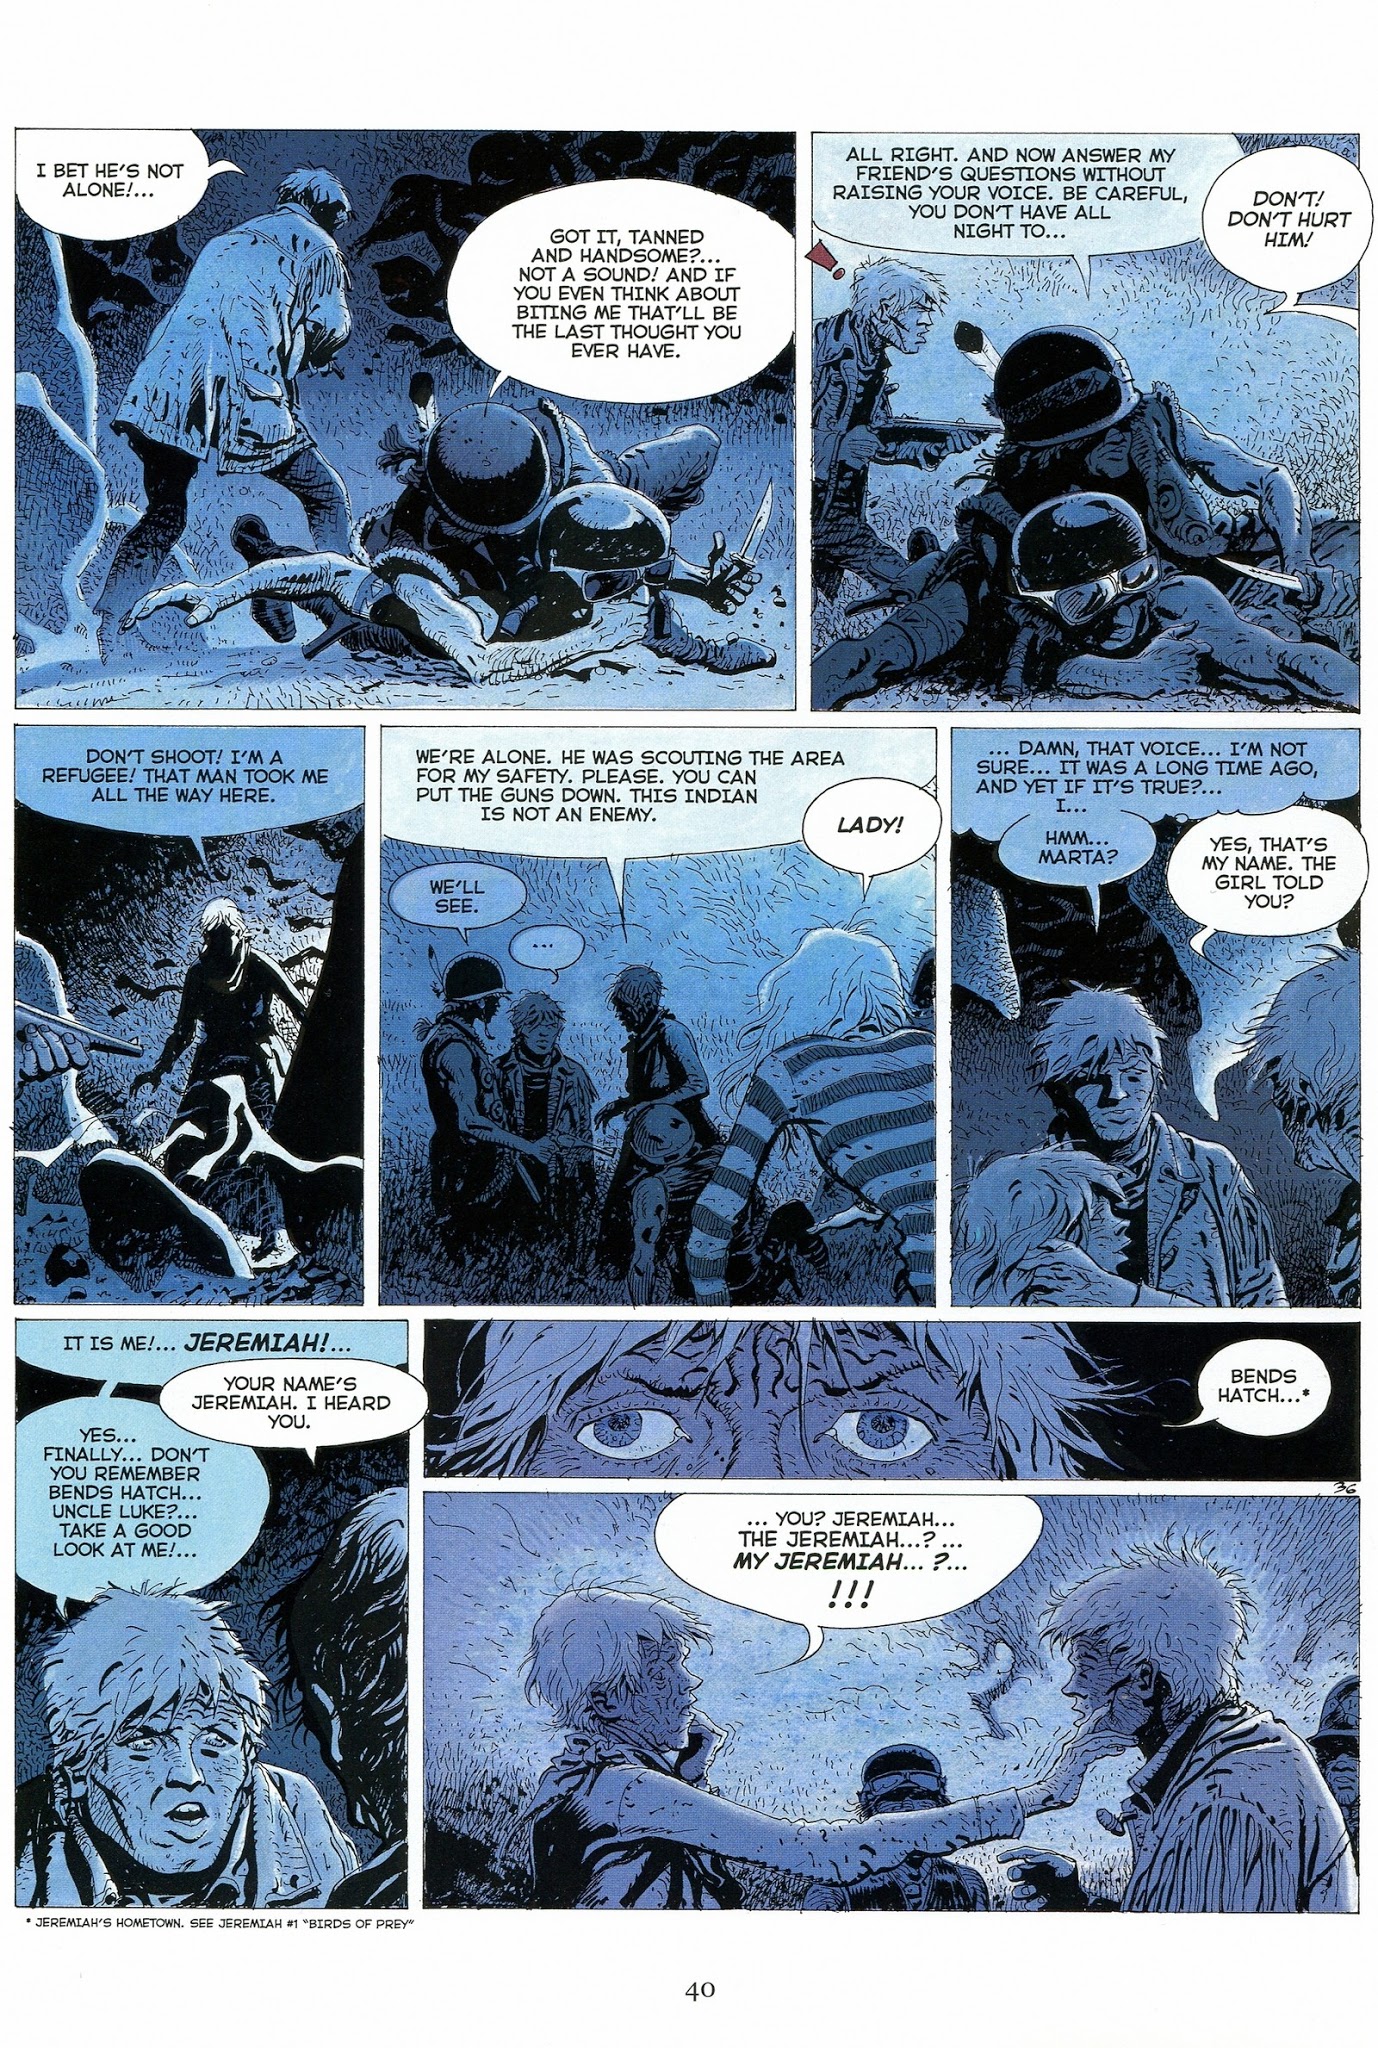 Read online Jeremiah by Hermann comic -  Issue # TPB 2 - 41